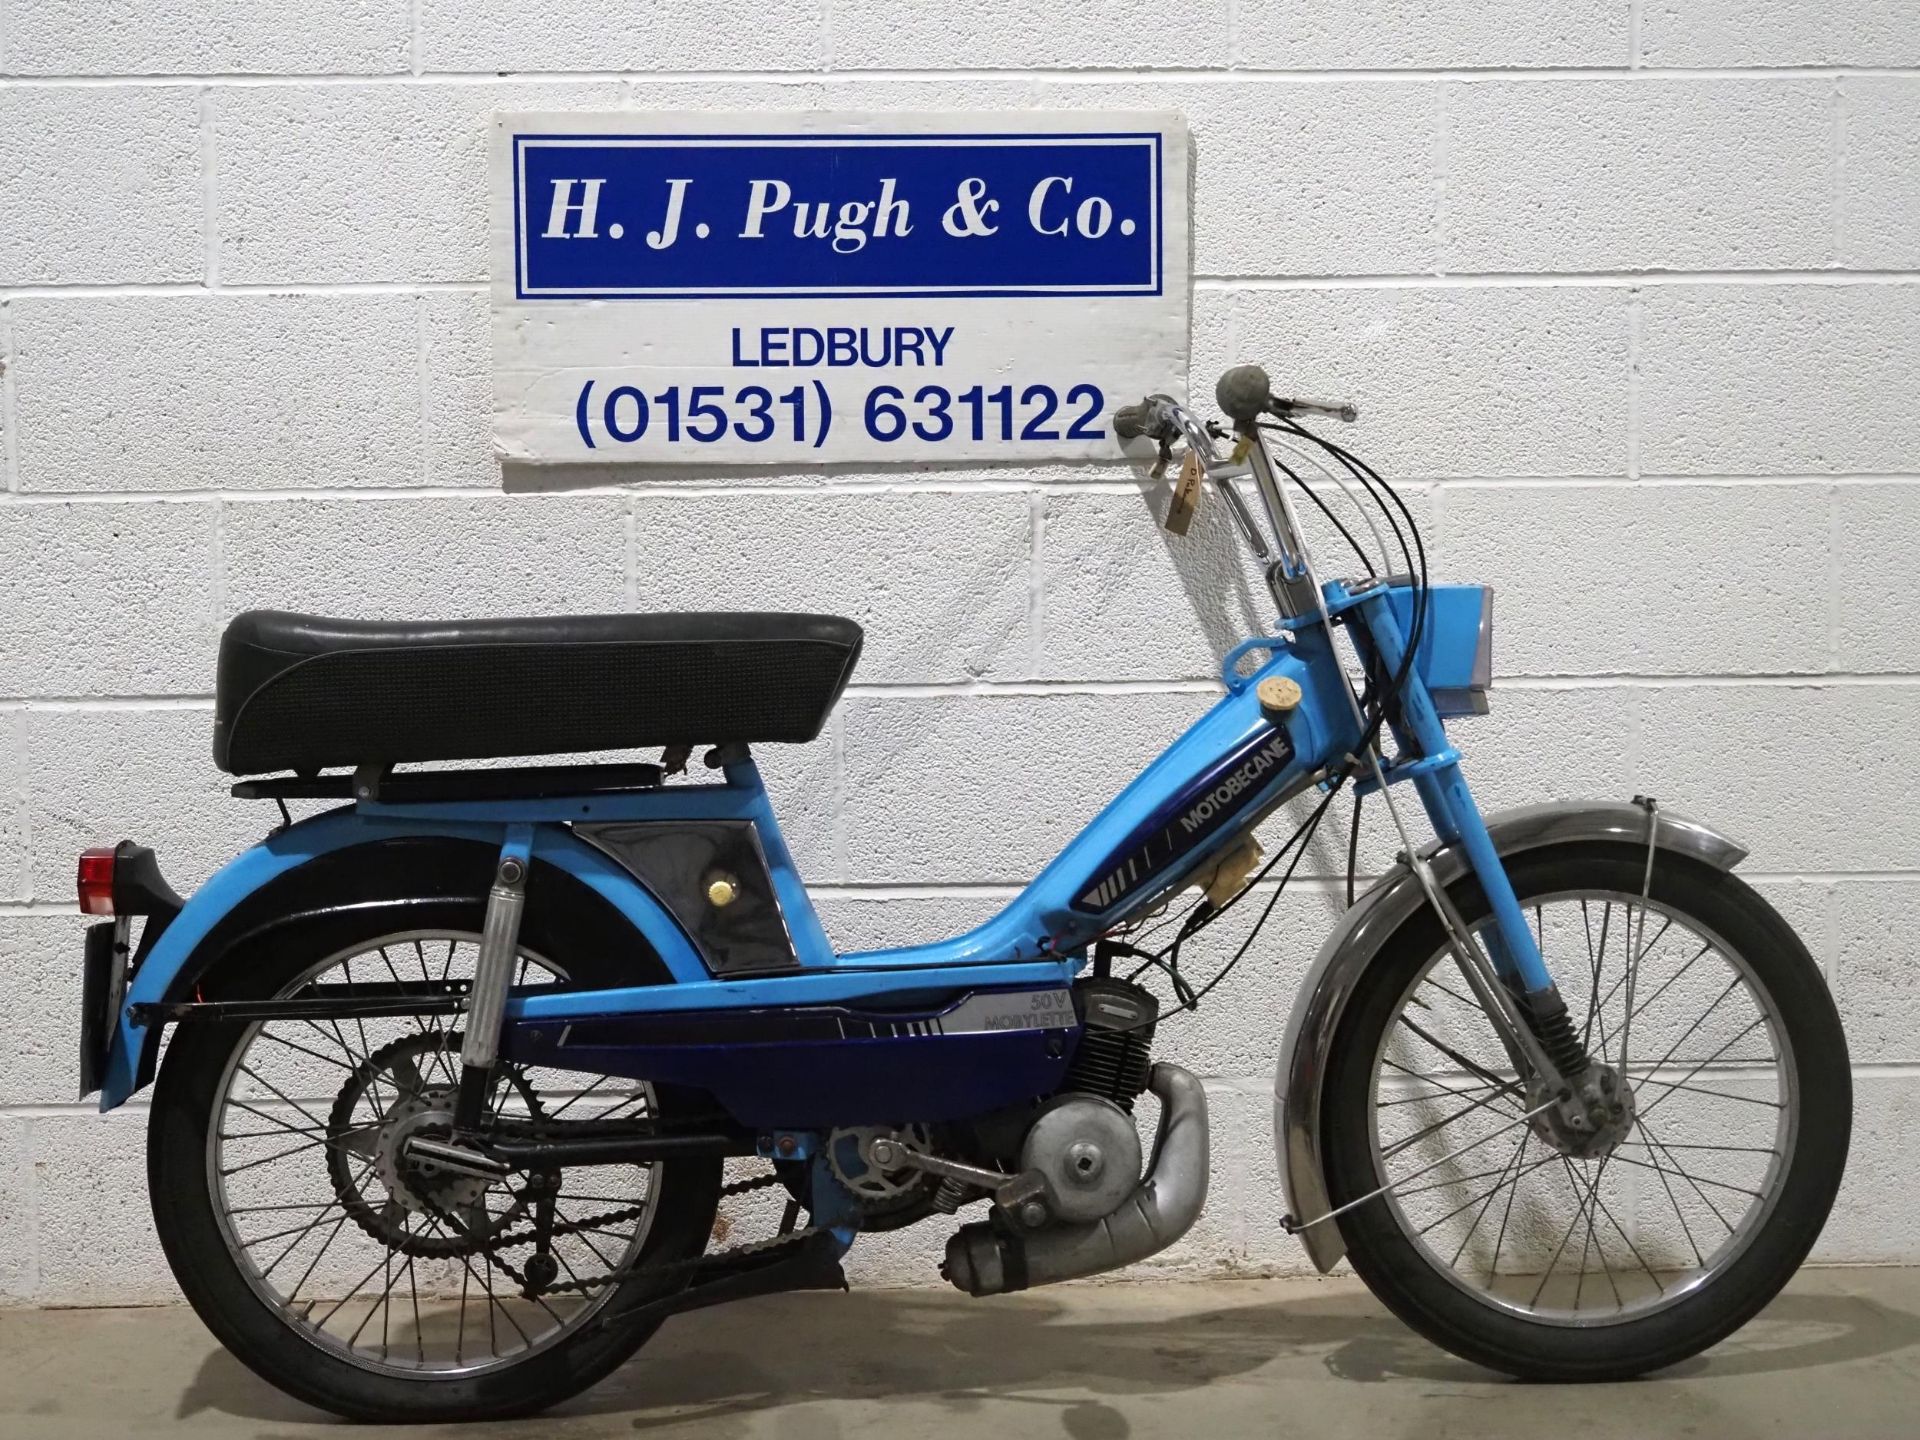 Motobecane 50V Mobylette moped. 1977. 49cc. Was running when stored some time ago and so will need